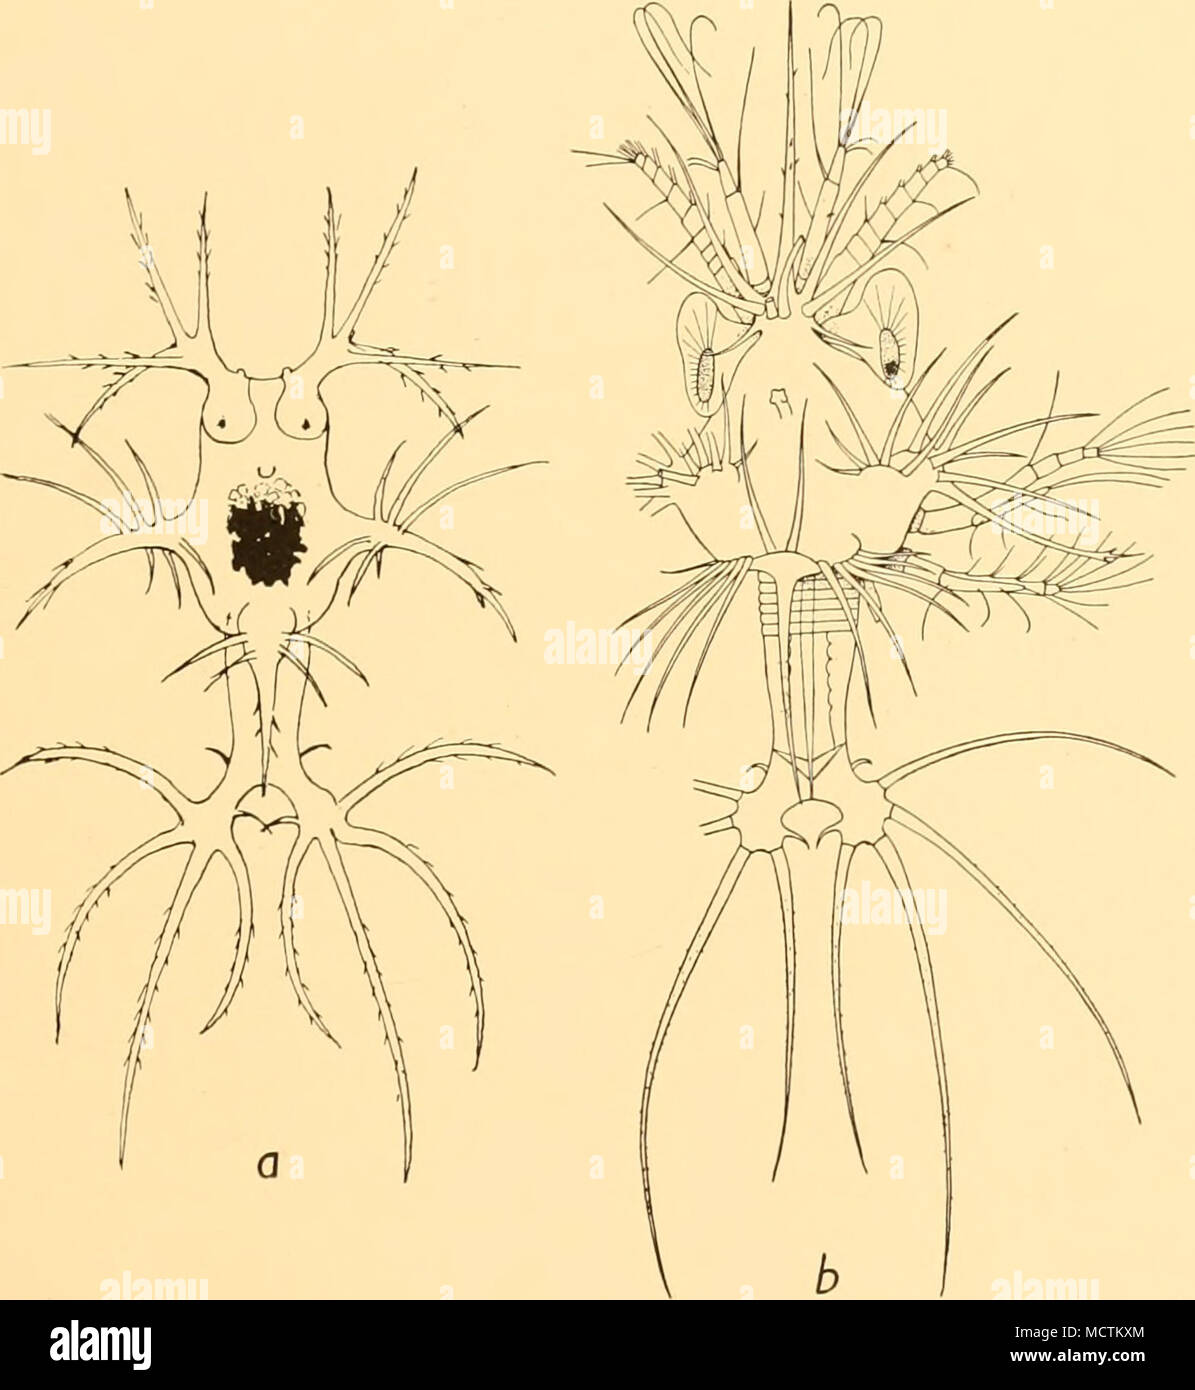 . Fig. 30. S. corniadum A. a, Elaphocaris i; b, Elaphocaris 2. Elaphocaris 2 (Fig. 30 h). Length 1-3 mm. Rostrum 0-85 mm. Rostrum simple, with four pairs of long spines at base. Carapace with a pair of long lateral spines and a group of about ten long spines springing from an elevation of the carapace at the base of the lateral spines. Posterior margin of carapace with a dorsal spine as long as the abdomen and a transverse row of 14 long spines. Dorsal organ very large. Telson arms very short, as wide as long, spine 5 considerably shorter than spine 4. Eye very large, asymmetrical, width of ey Stock Photo